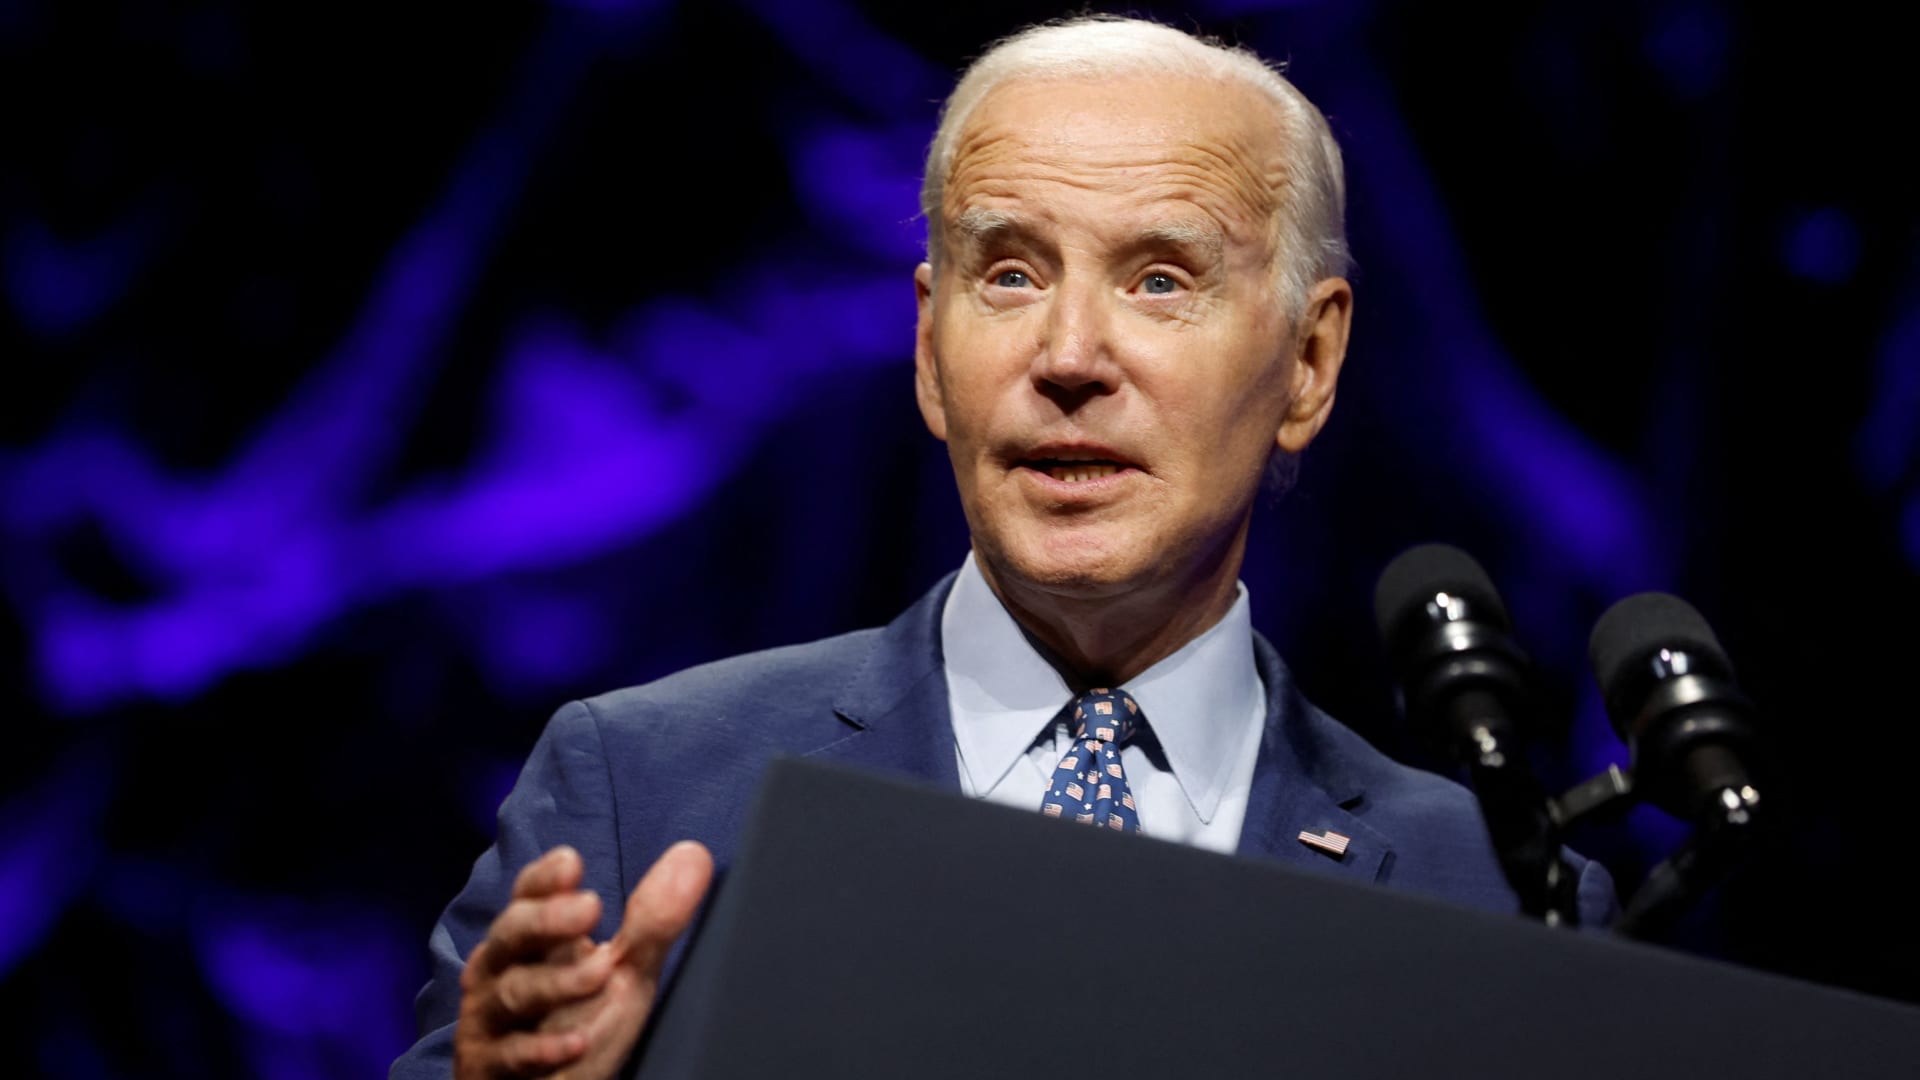 Key environmental groups endorse Biden despite approval of fossil fuel projects